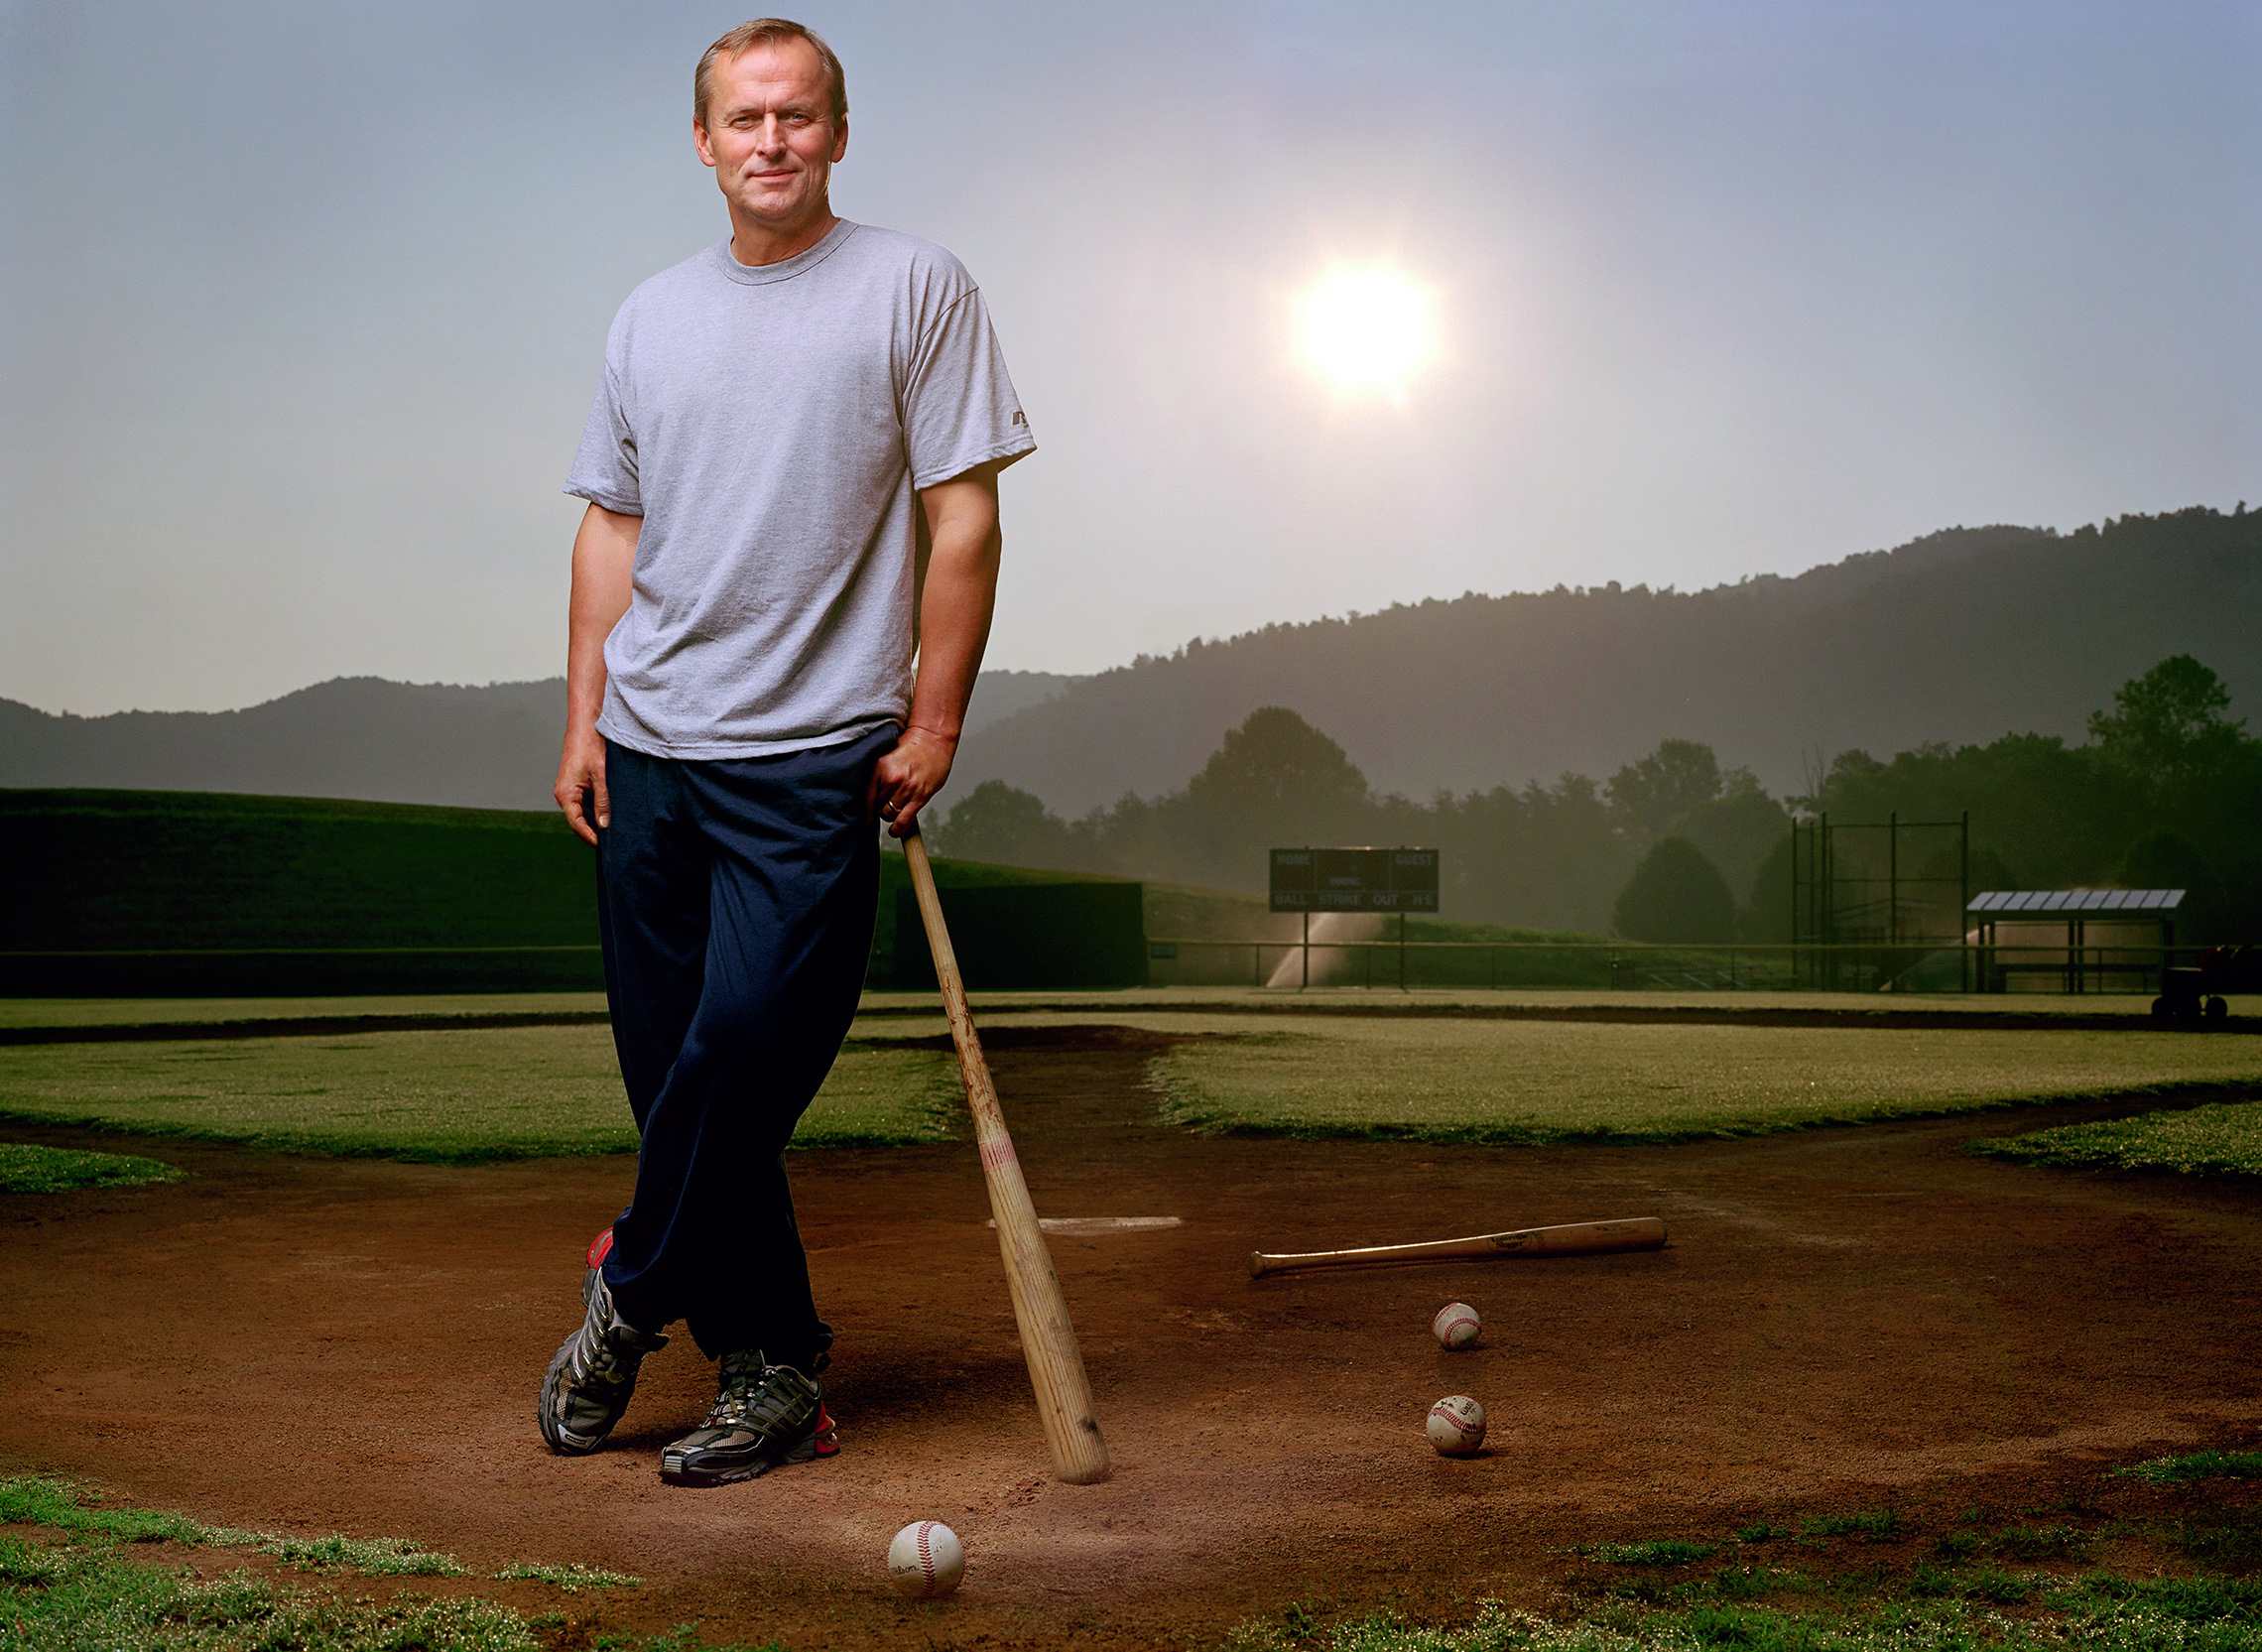 2012: When he’s not writing, Grisham devotes time to charitable causes, including, most recently, his Rebuild the Coast Fund, which raised 8.8 million dollars for Gulf Coast relief in the wake of Hurricane Katrina. He also keeps up with his greatest passion: baseball. The man who dreamed of being a professional baseball player now serves as the local Little League commissioner. The six ballfields he built on his property have played host to over 350 kids on 26 Little League teams. (Jonas Karlsson/trunkarchive.com)